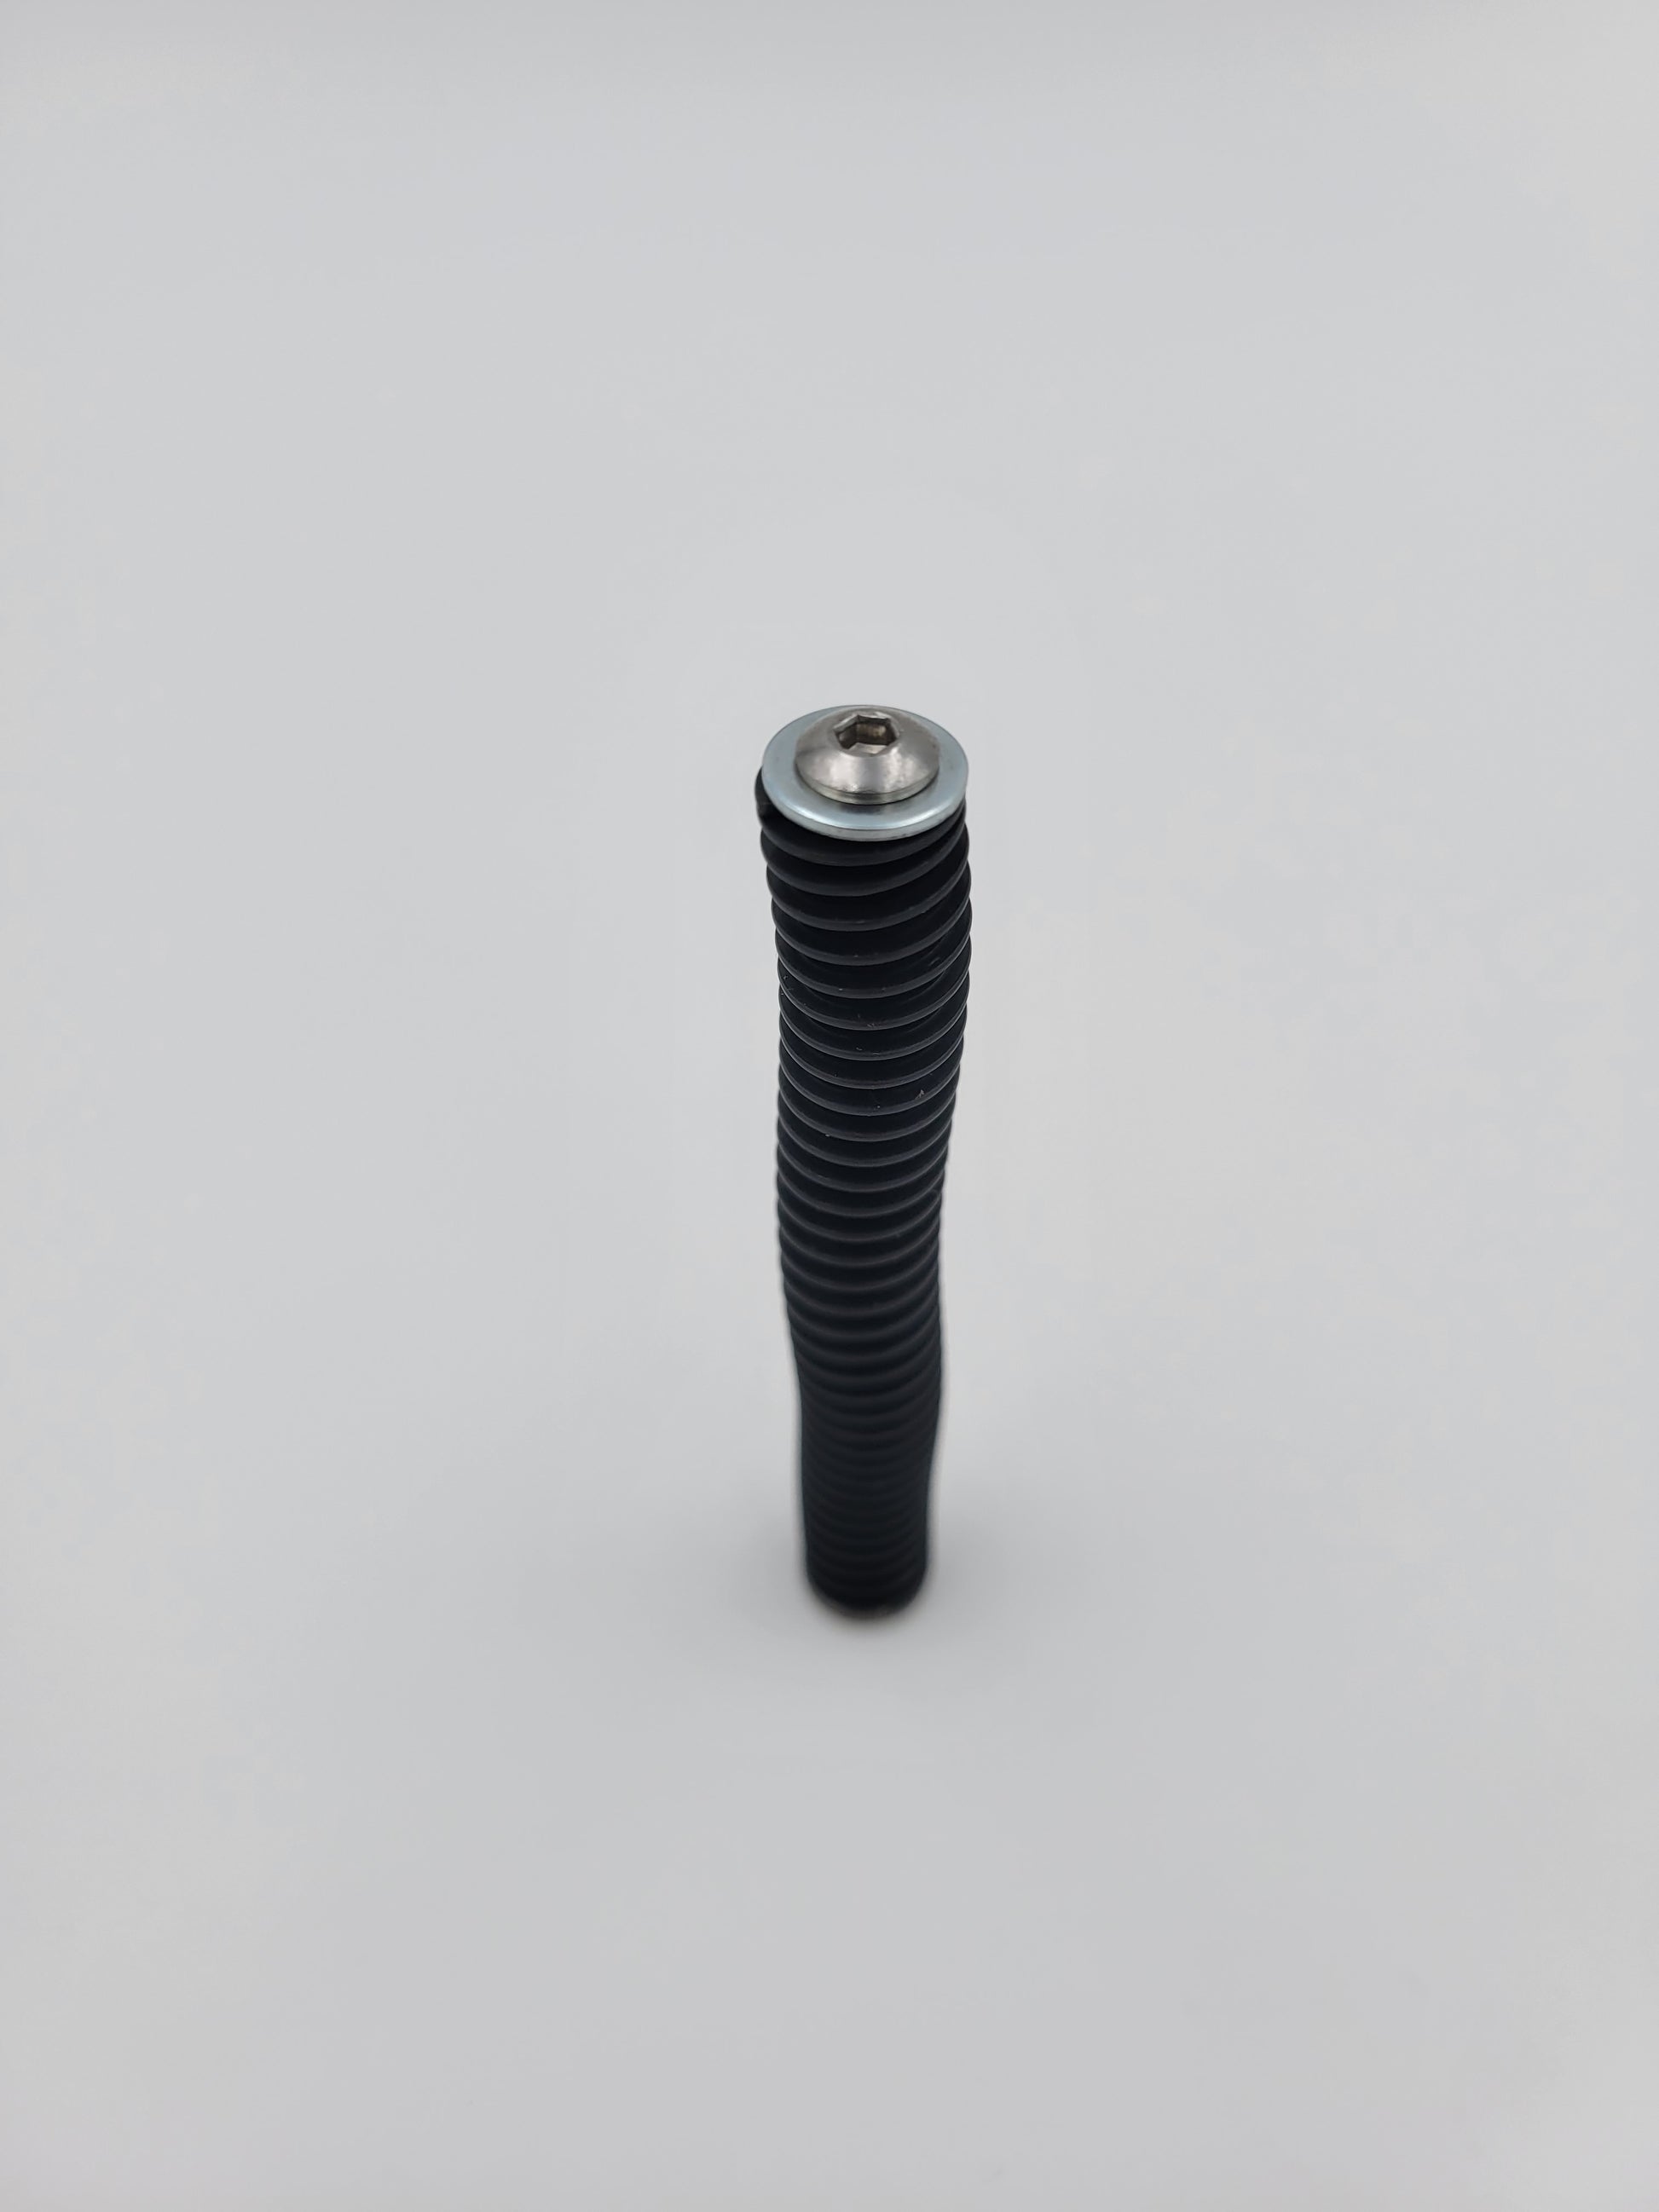 G17 Recoil Spring - Top View 